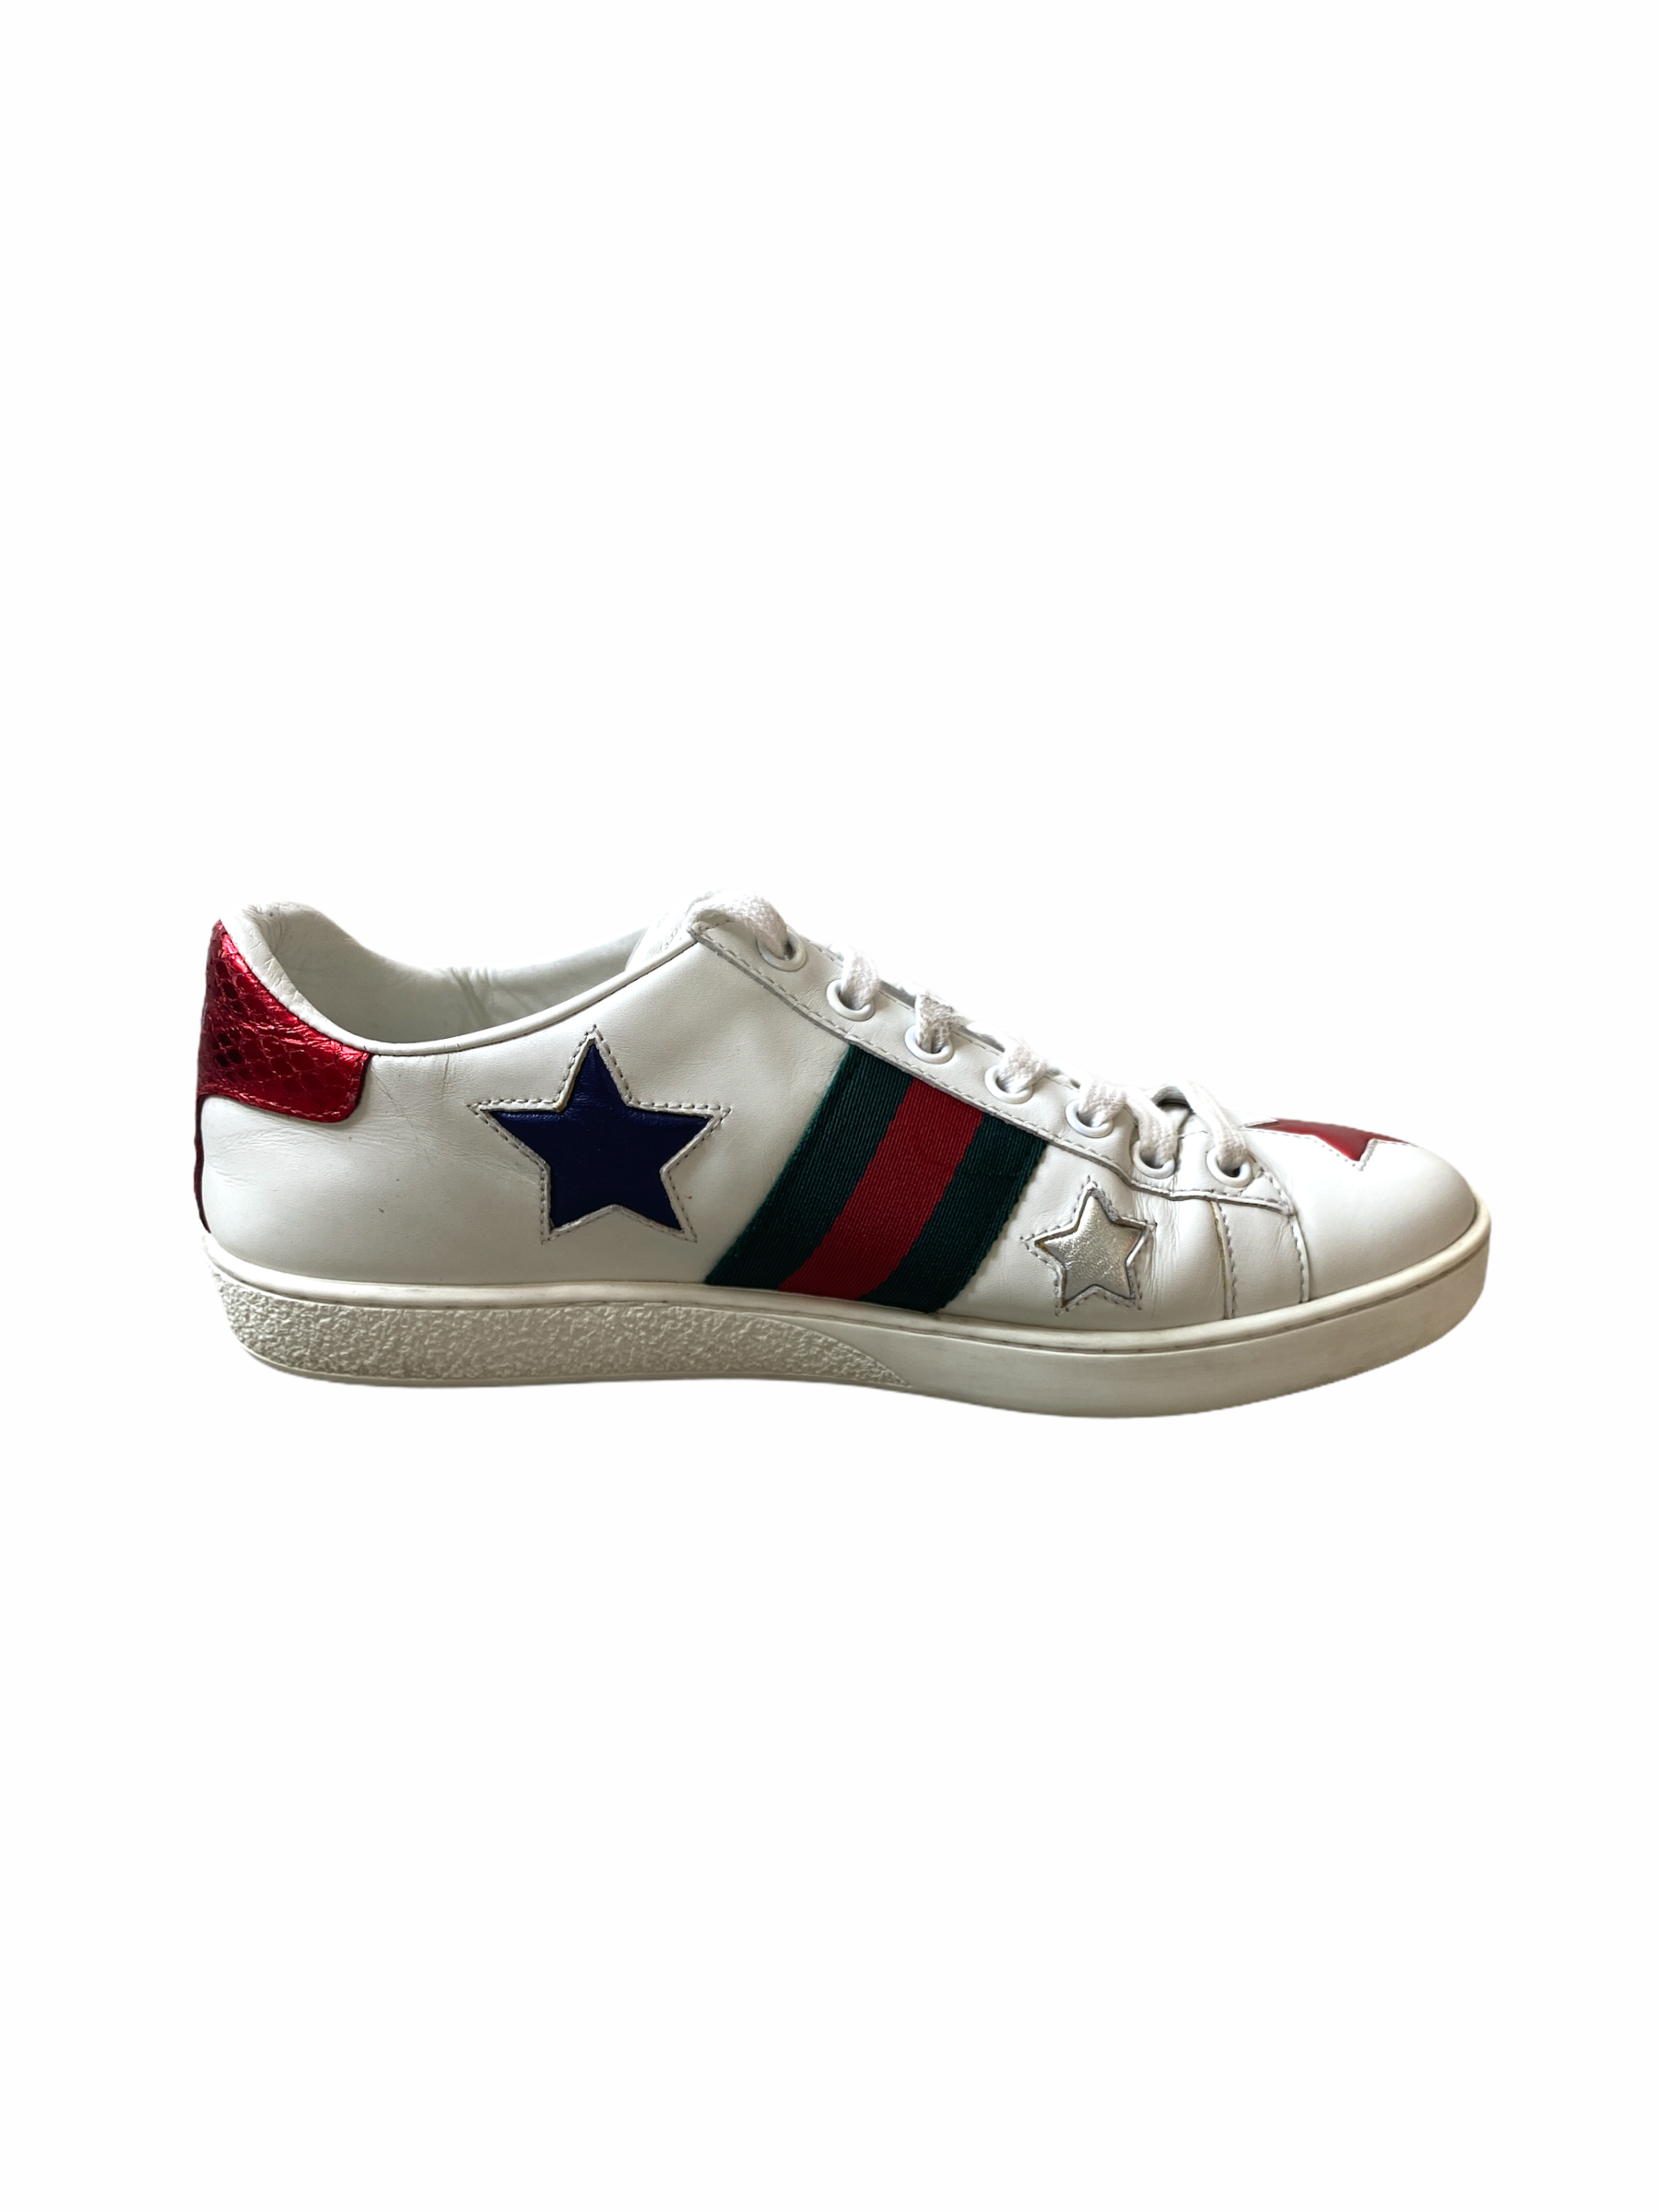 Pre Loved Gucci sneakers size 37 EU - The Luxury Flavor